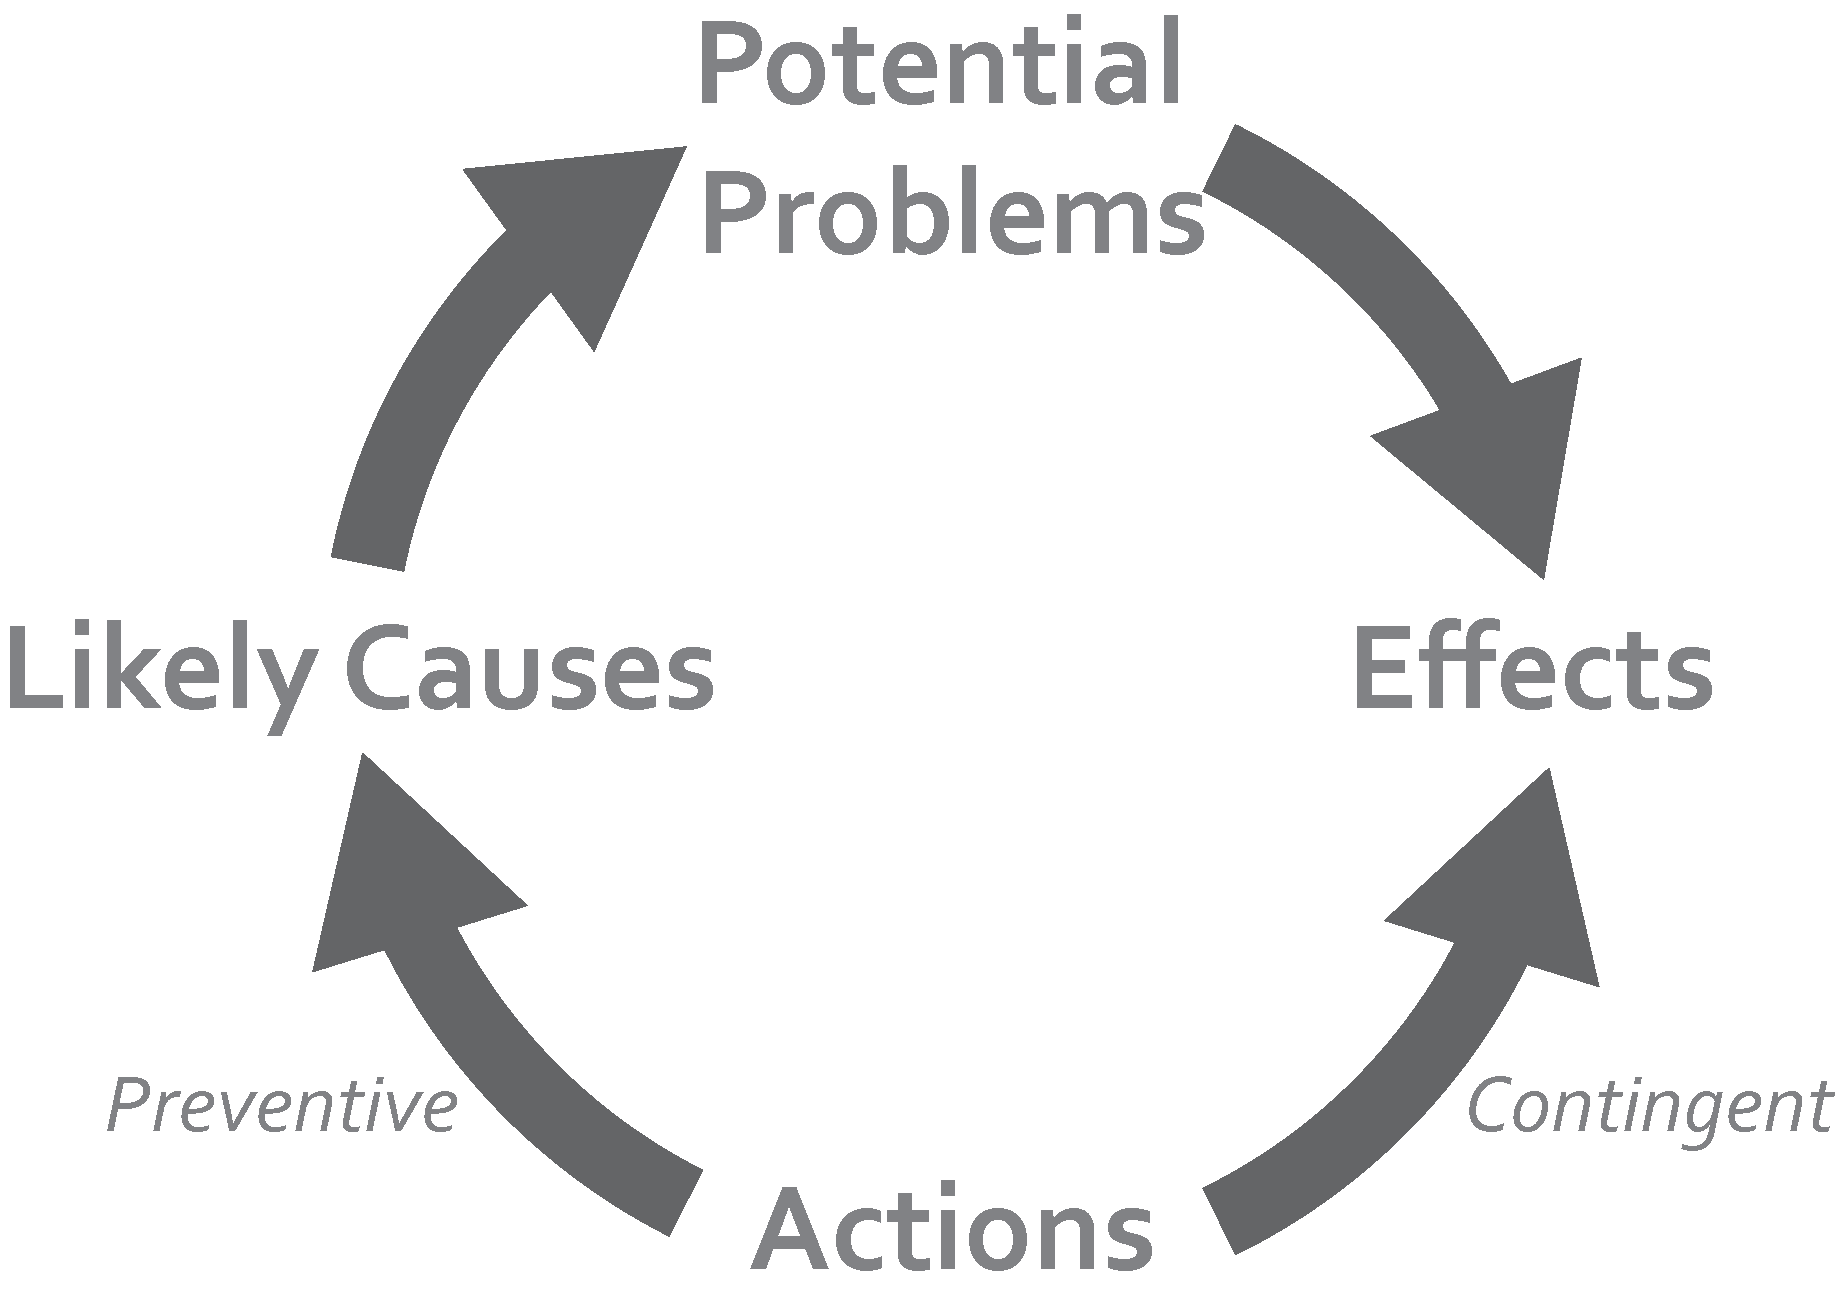 Determining the cause of a potential problem can lead to either preventative or contingent actions